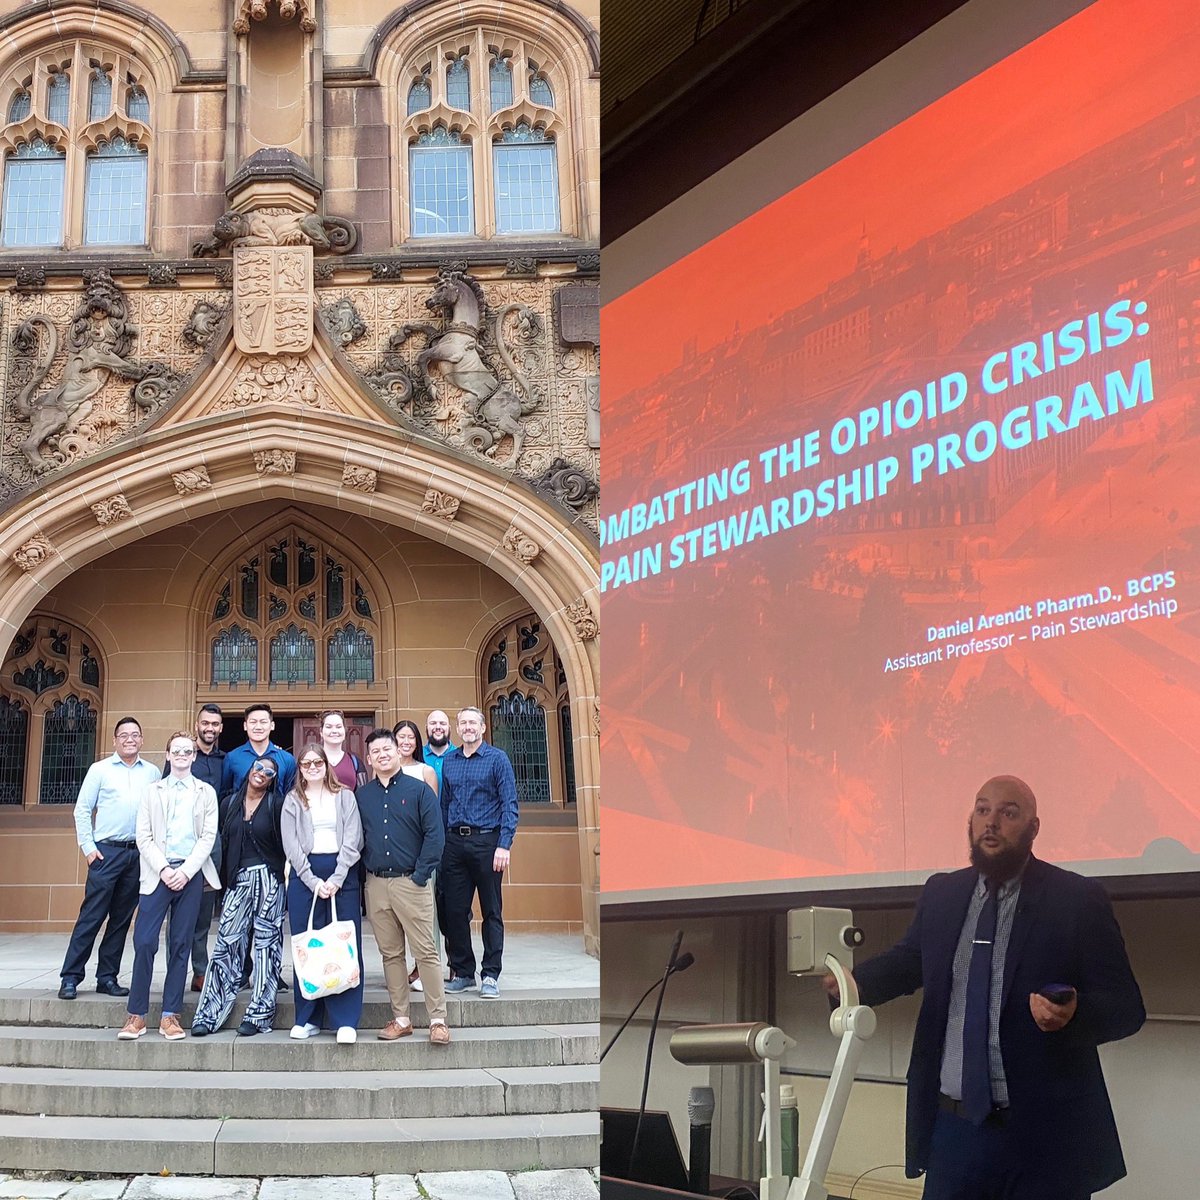 Great to catch up with #pharmacy colleagues from @uofcincy and host their #PharmD students @Sydney_Uni and hearing about their #pain stewardship programs